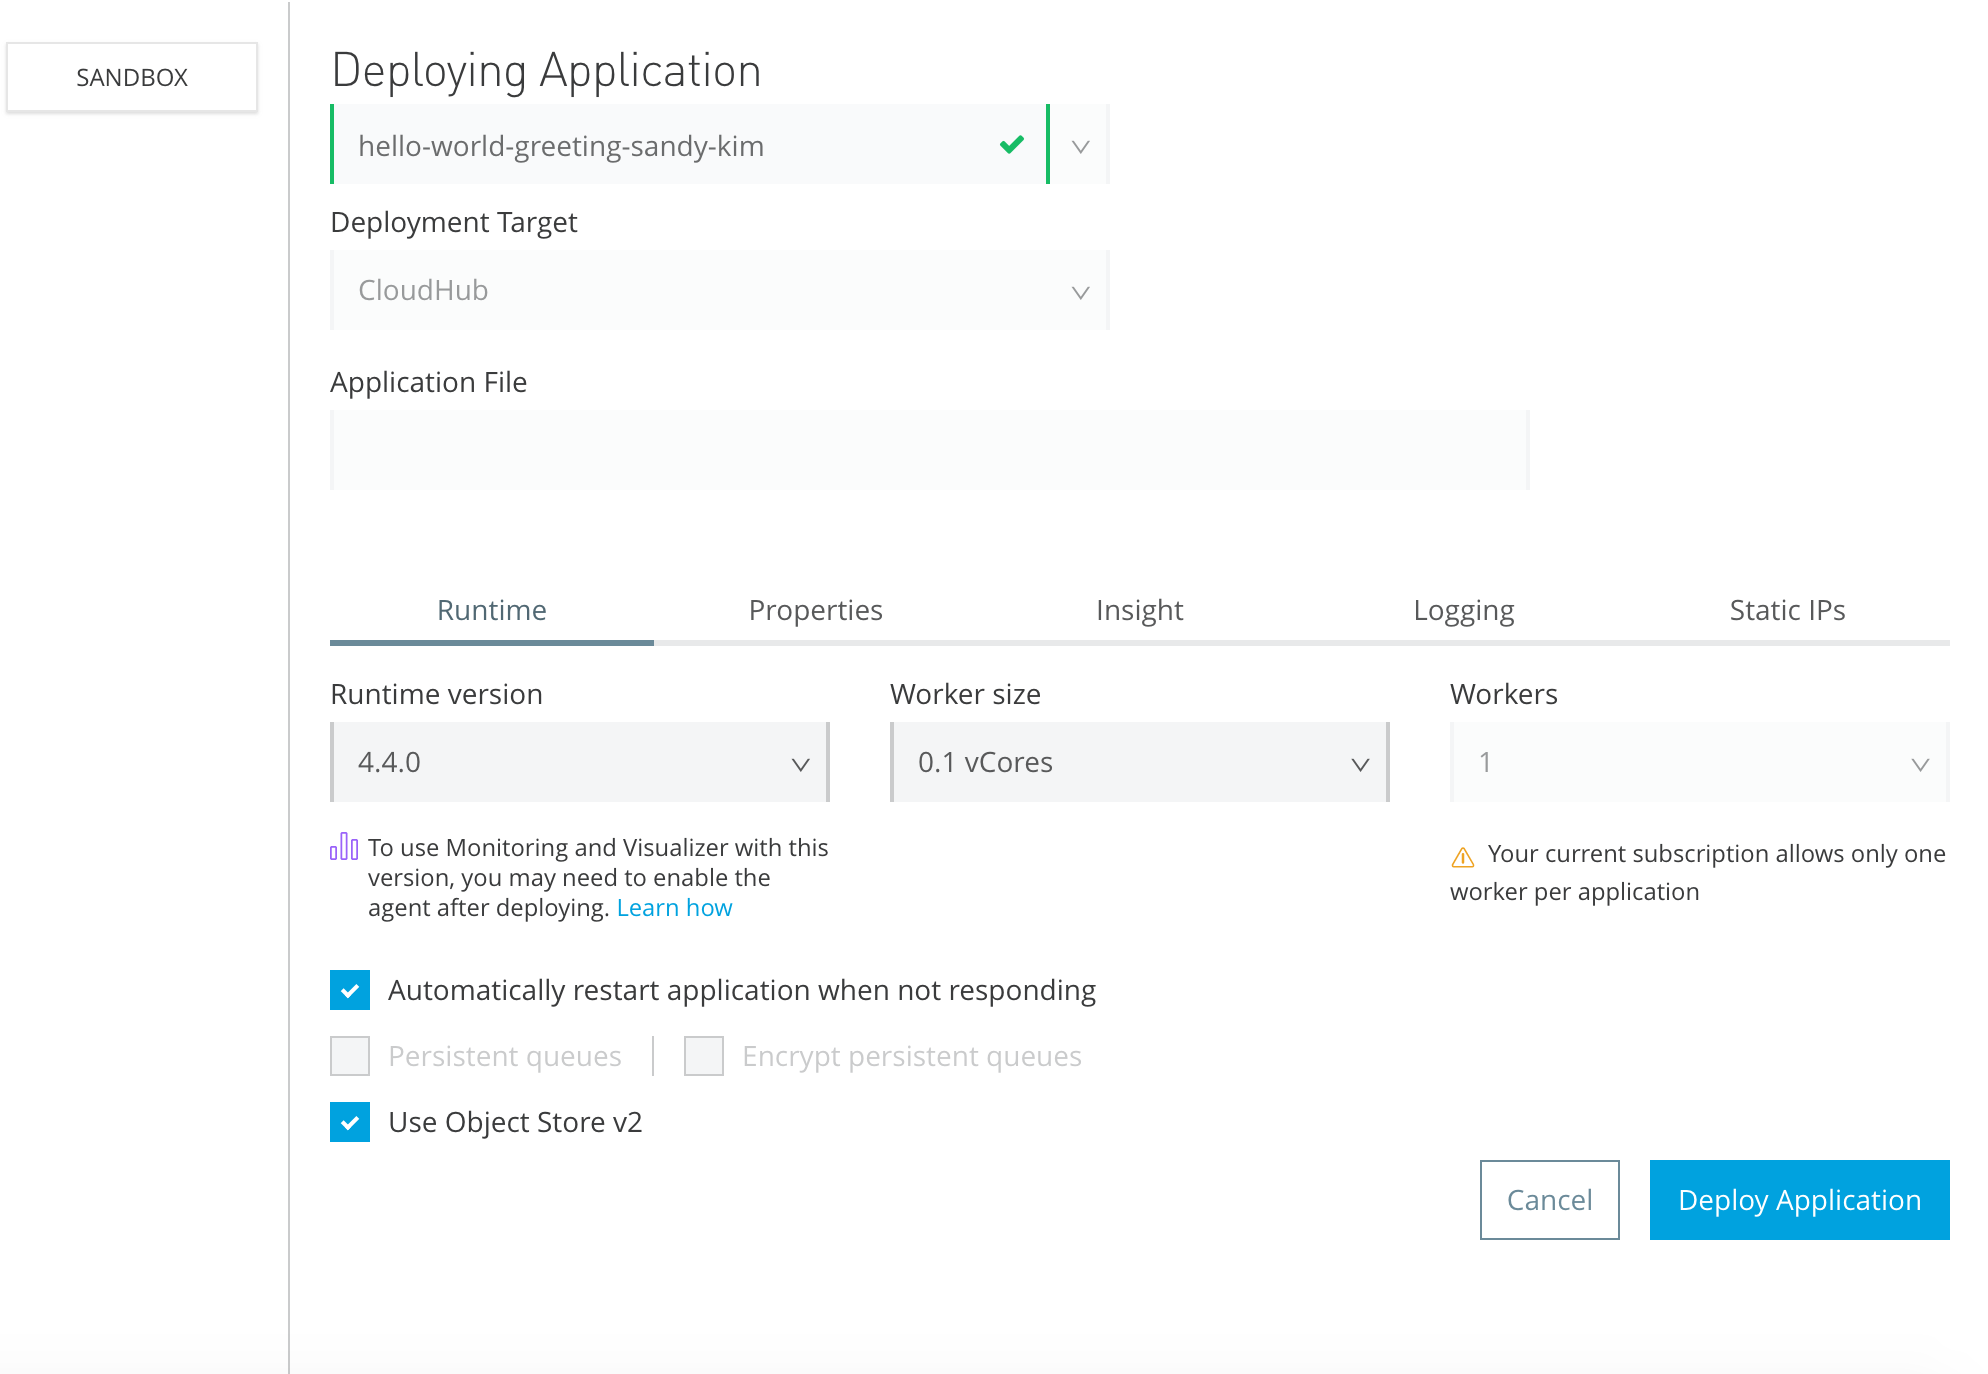 dialog for deploying to CloudHub